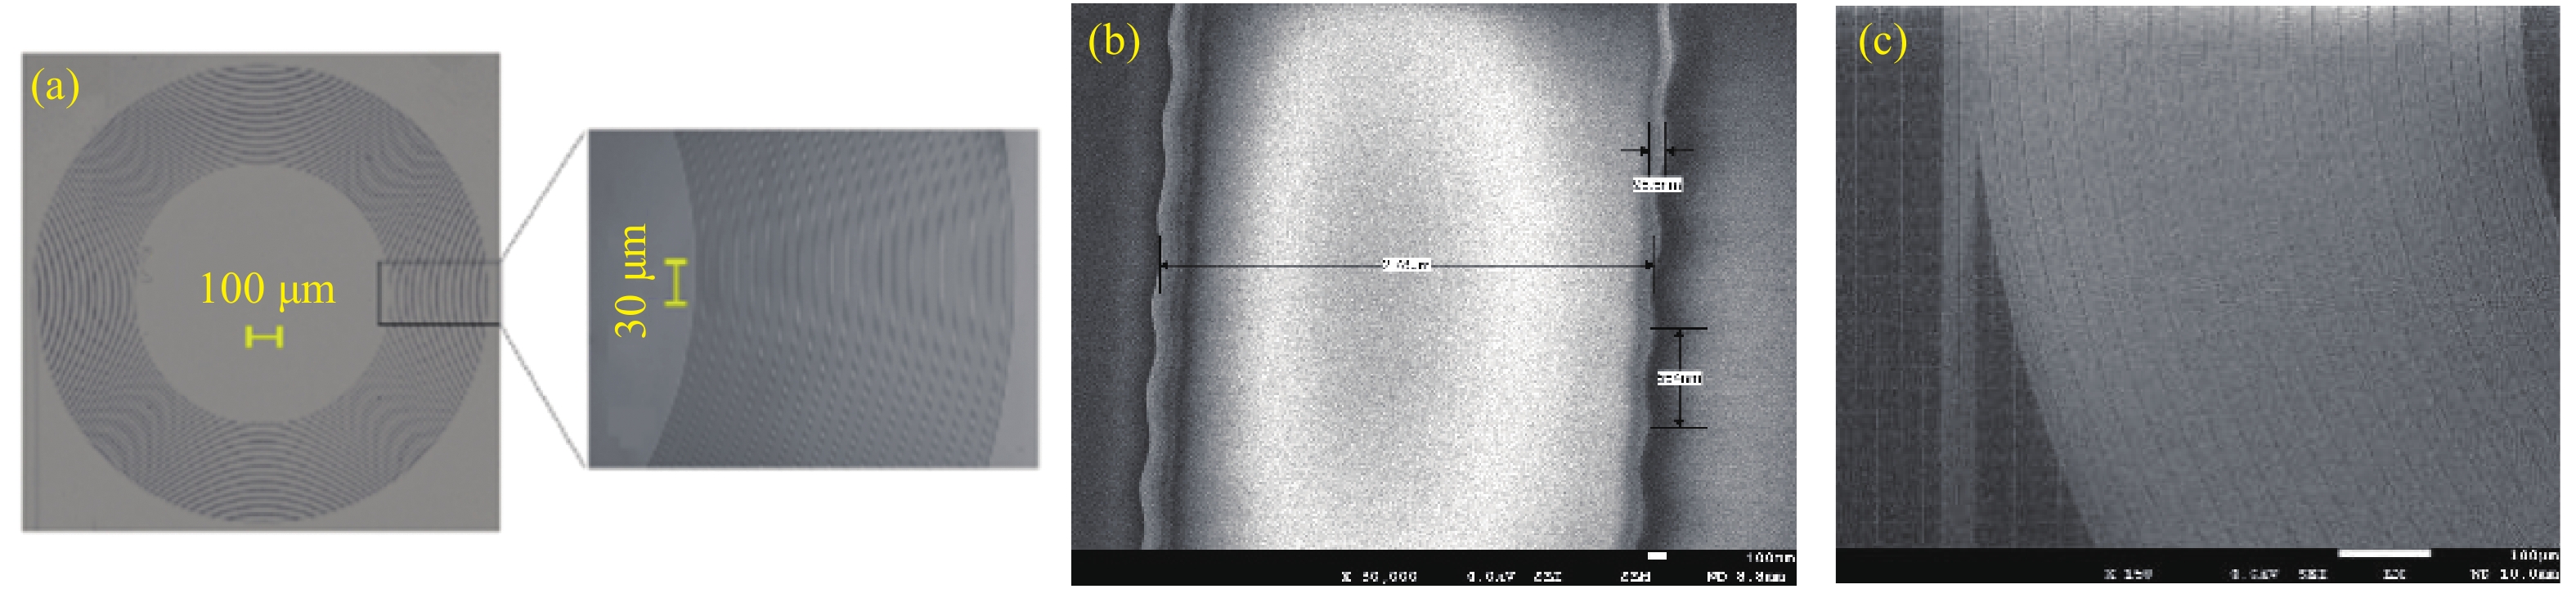 Silicon integrated chirp Bragg grating chip. (a) Micrograph; (b) SEM of waveguide; (c) SEM of spiral grating